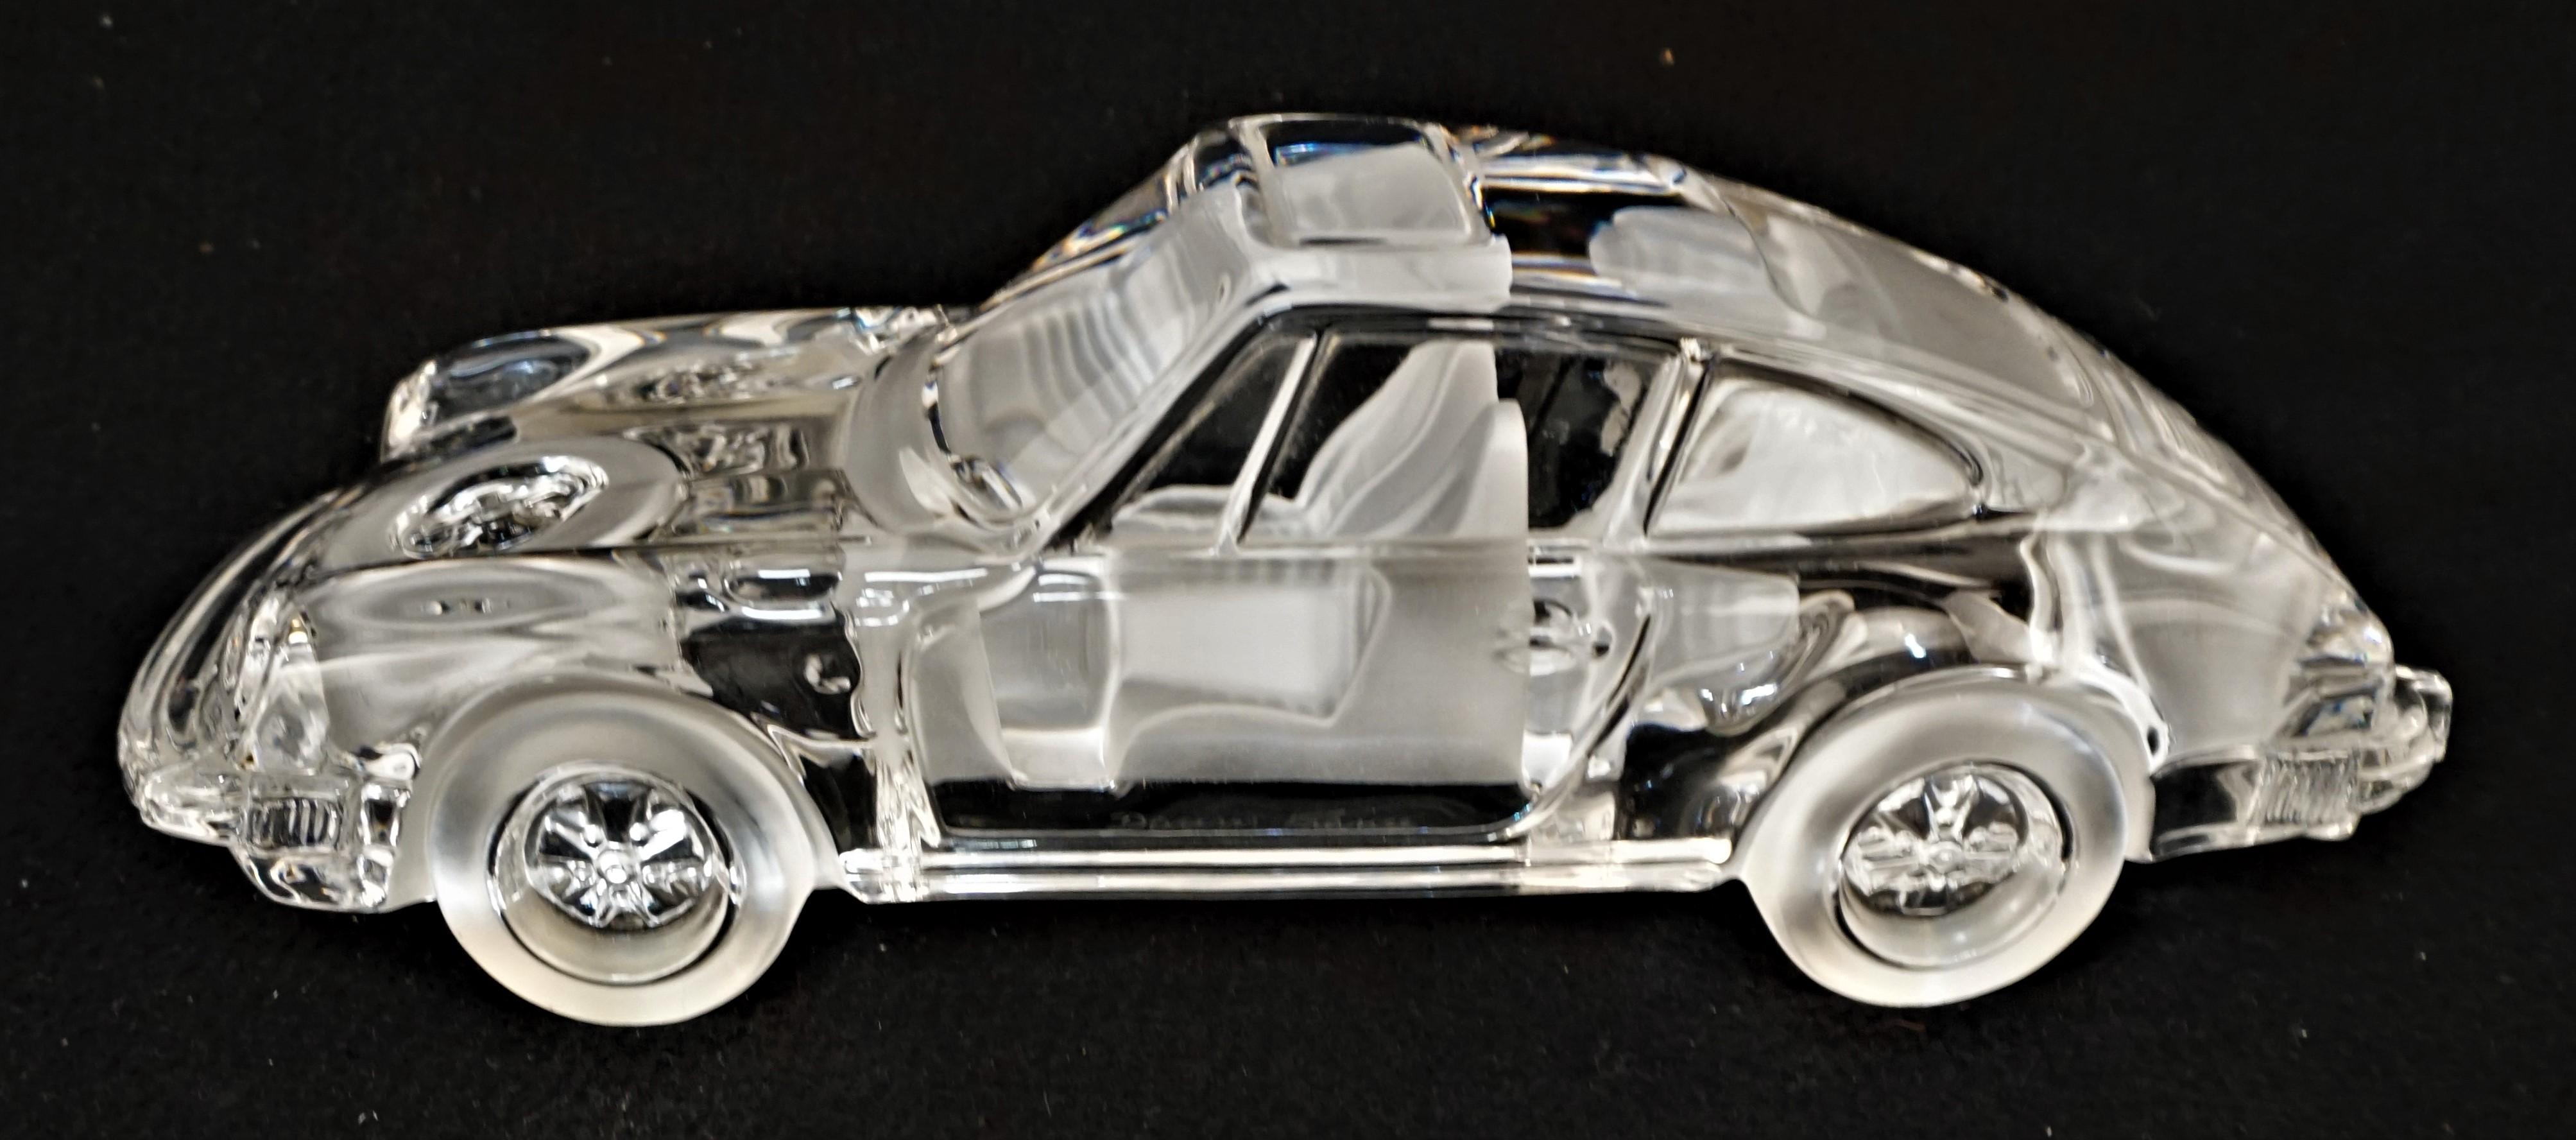 French Daum crystal vintage Porsche 911 Carrera in high quality finish in frosted engine, tires and seats and clear the rest of the body, designed by Xavier Froissart in 1987 for Daum.